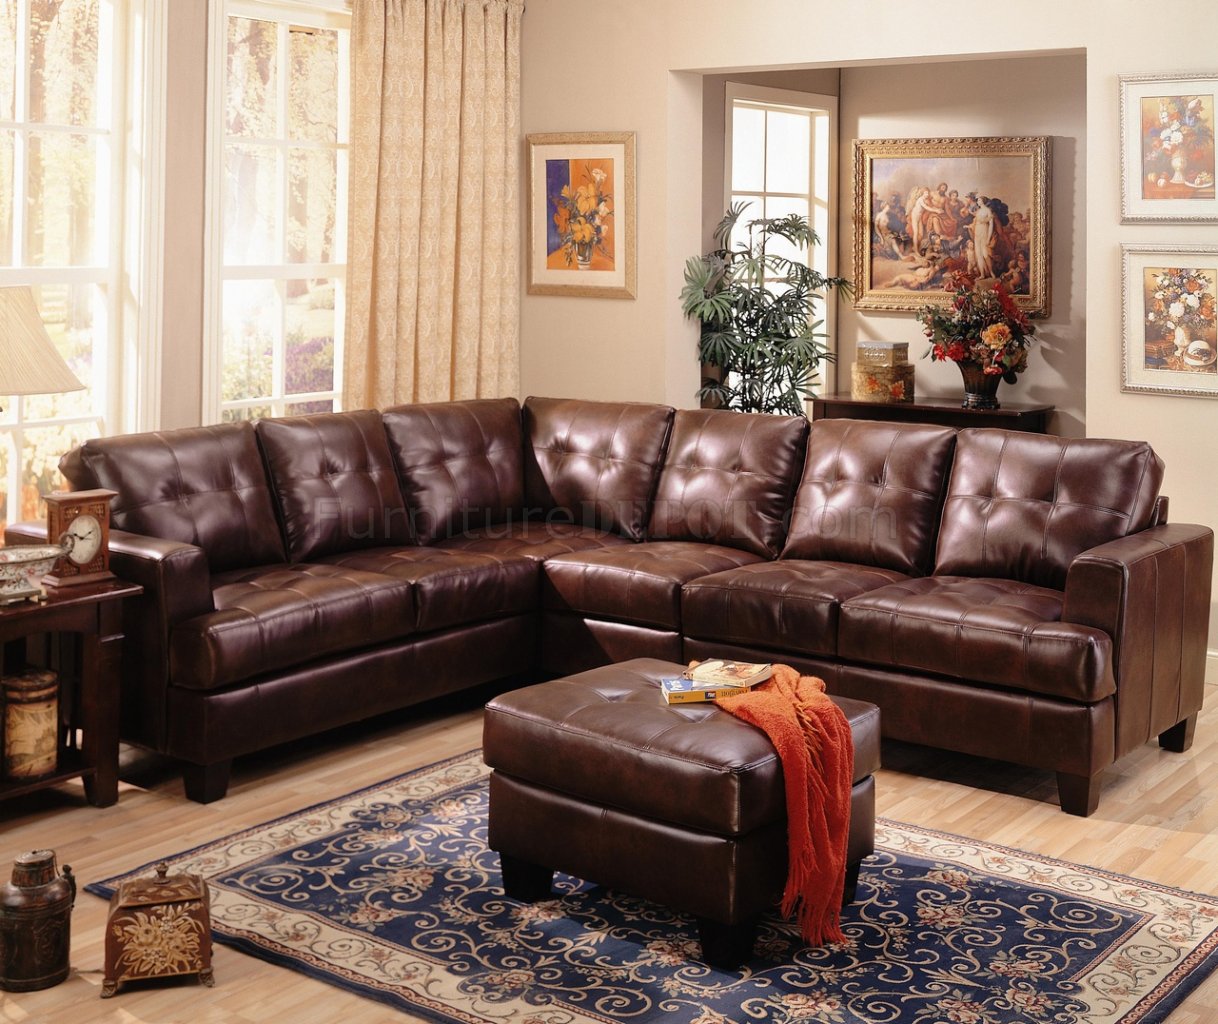 Modern Leather Sectional Living Room Furniture with Simple Decor